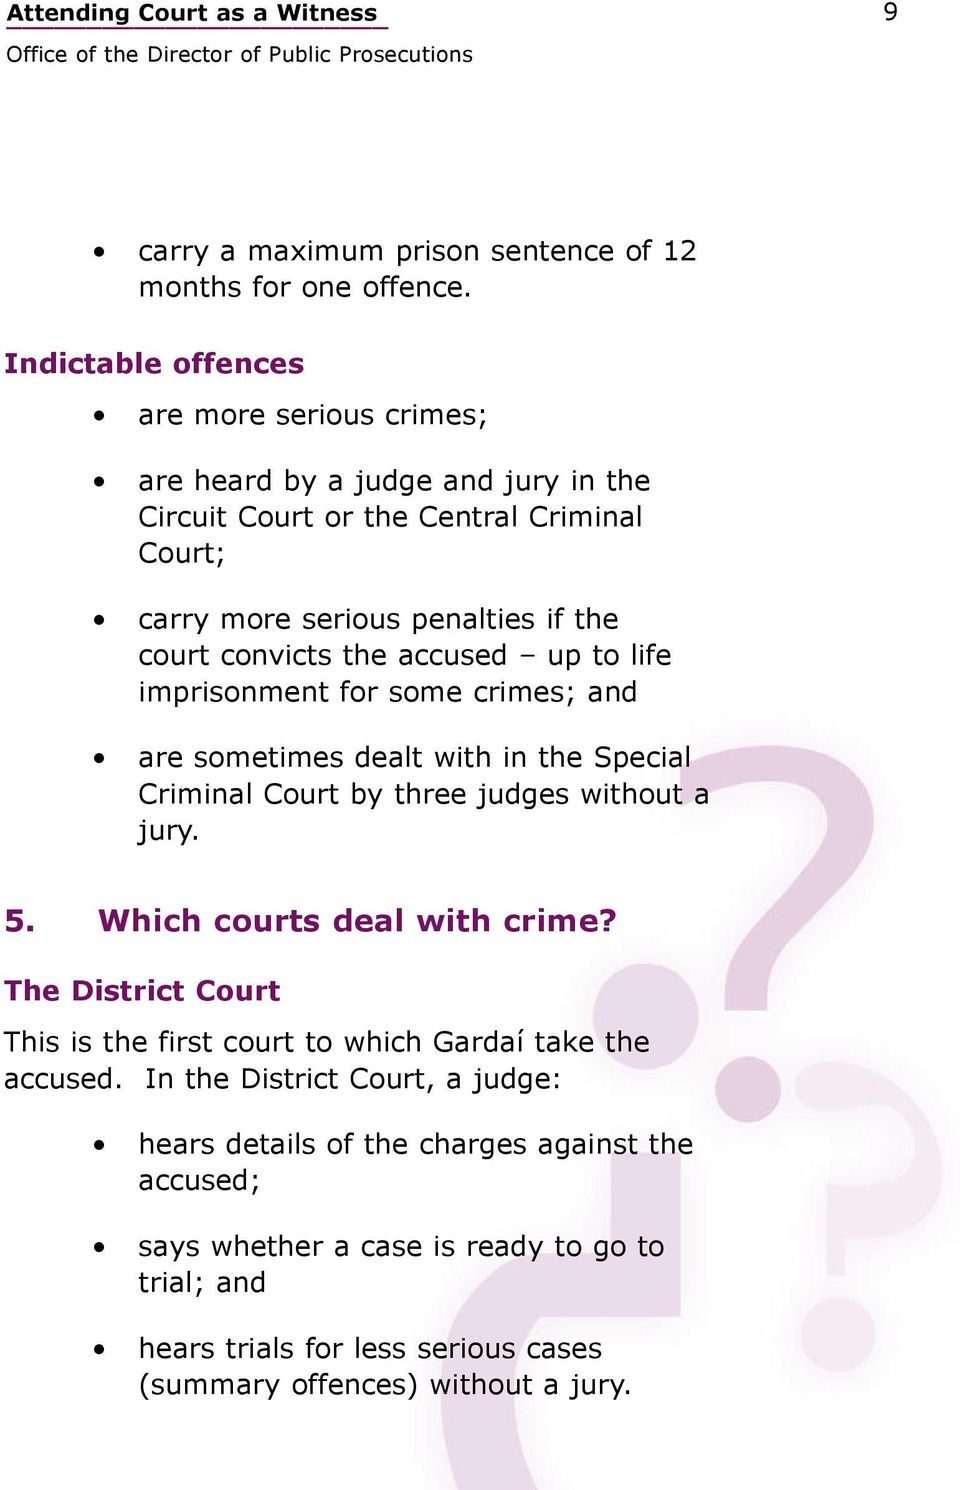 accused up to life imprisonment for some crimes; and are sometimes dealt with in the Special Criminal Court by three judges without a jury. 5. Which courts deal with crime?